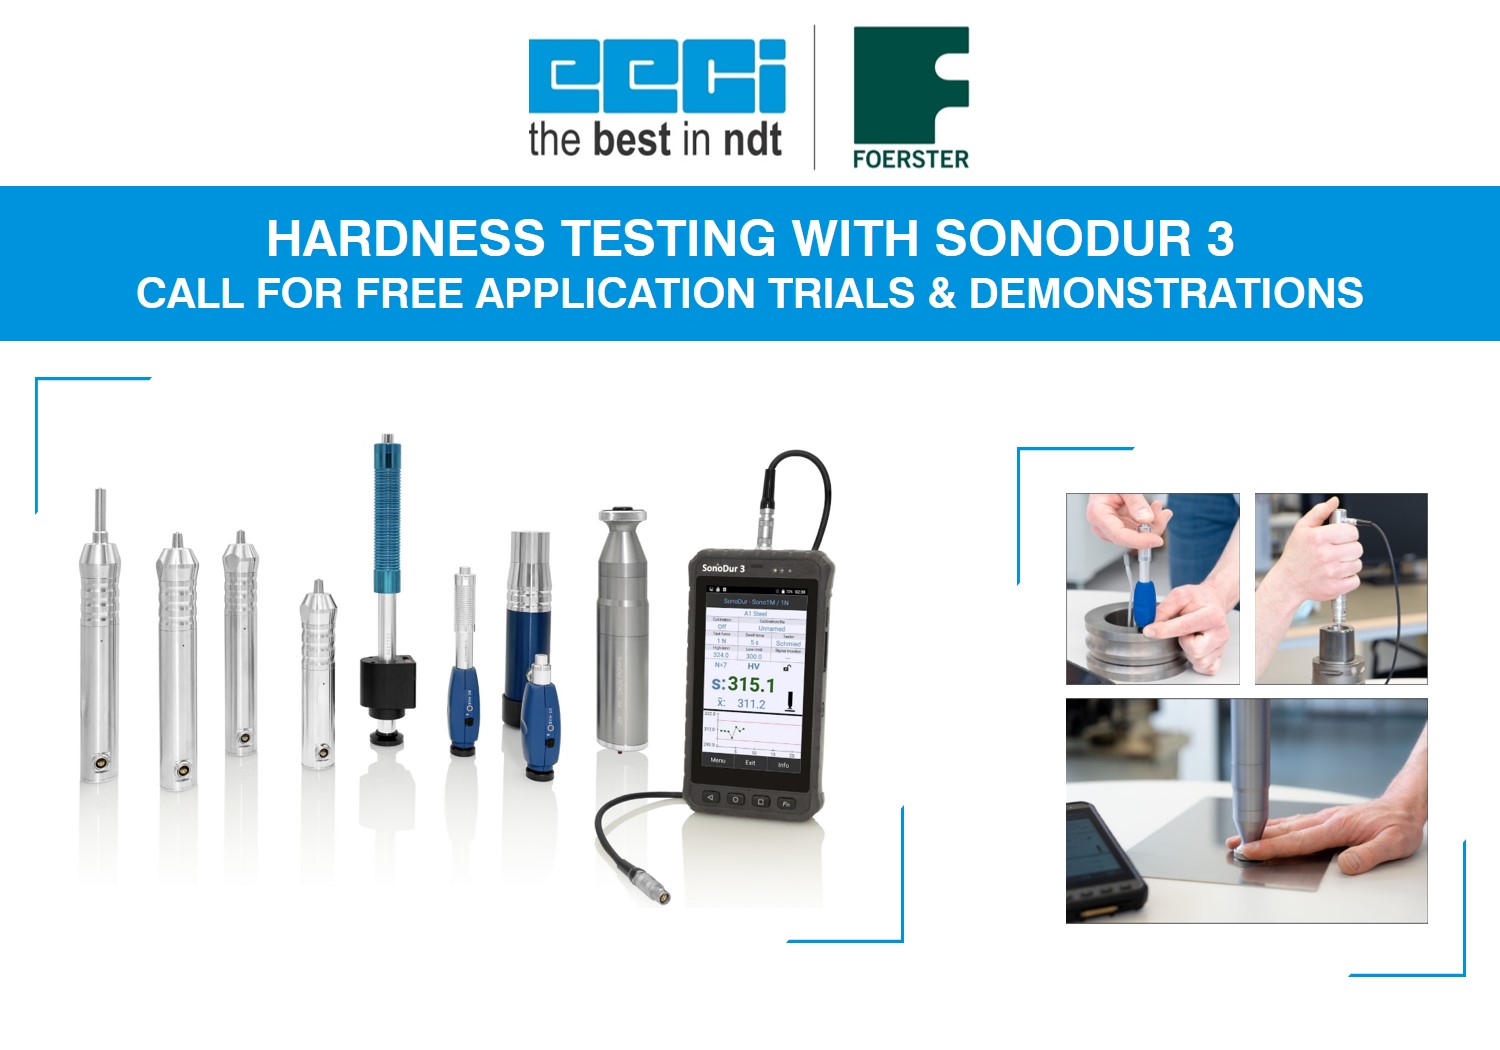 HARDNESS TESTING WITH SONODUR 3<br>CALL FOR FREE APPLICATION TRIALS & DEMONSTRATIONS